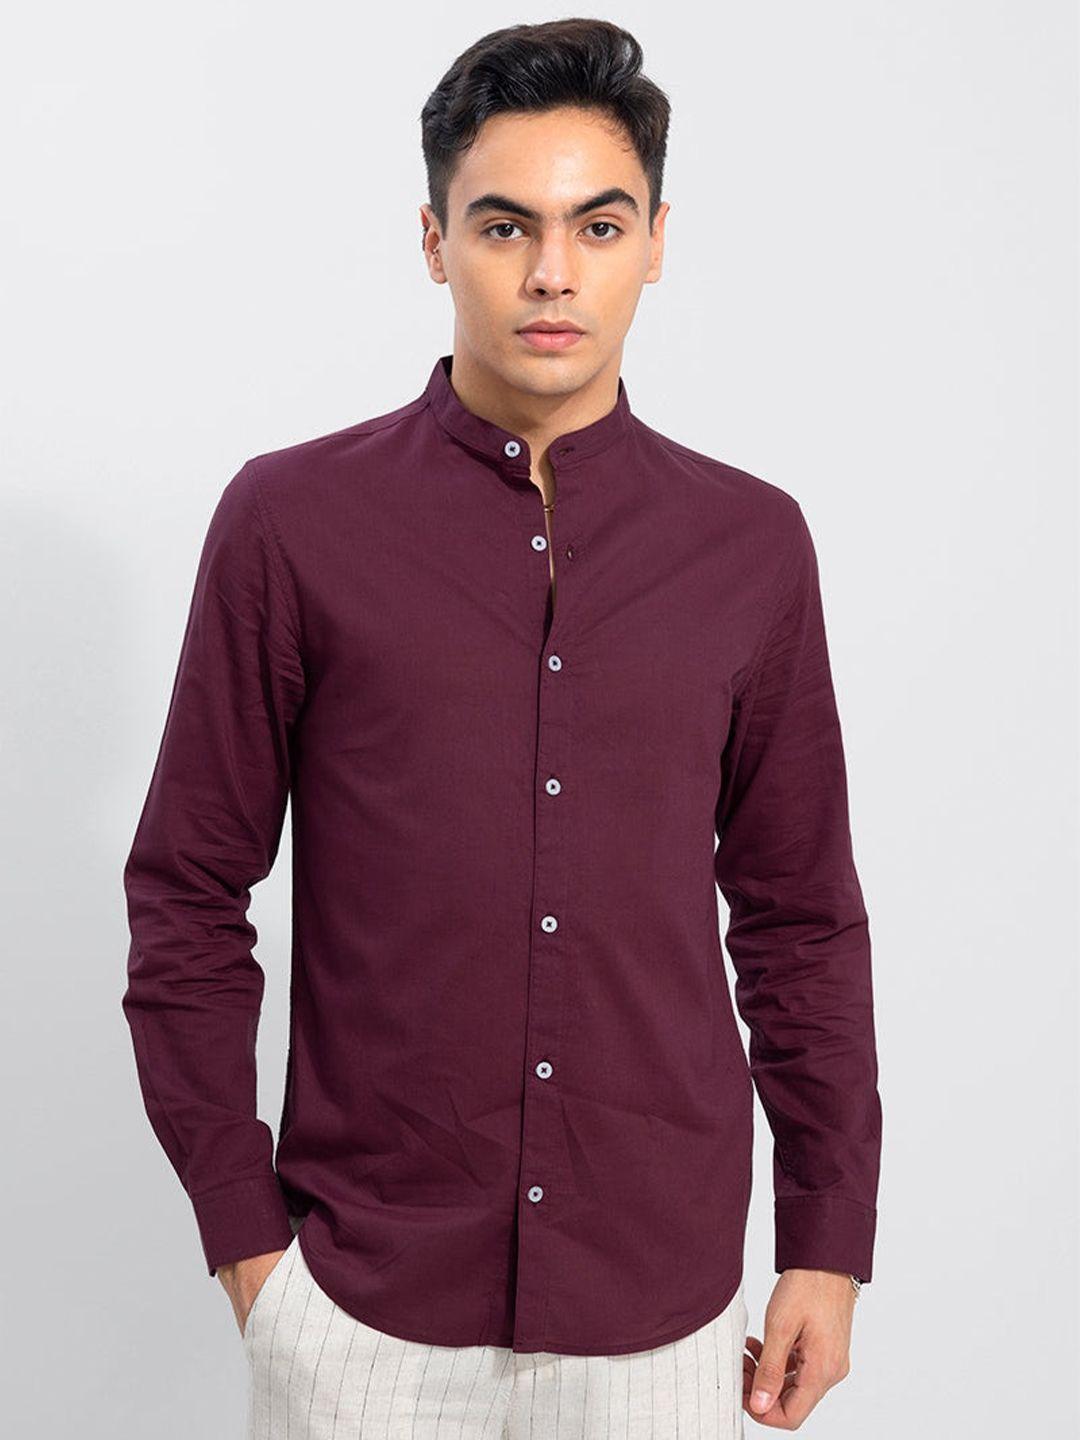 snitch-maroon-classic-band-collar-slim-fit-cotton-casual-shirt